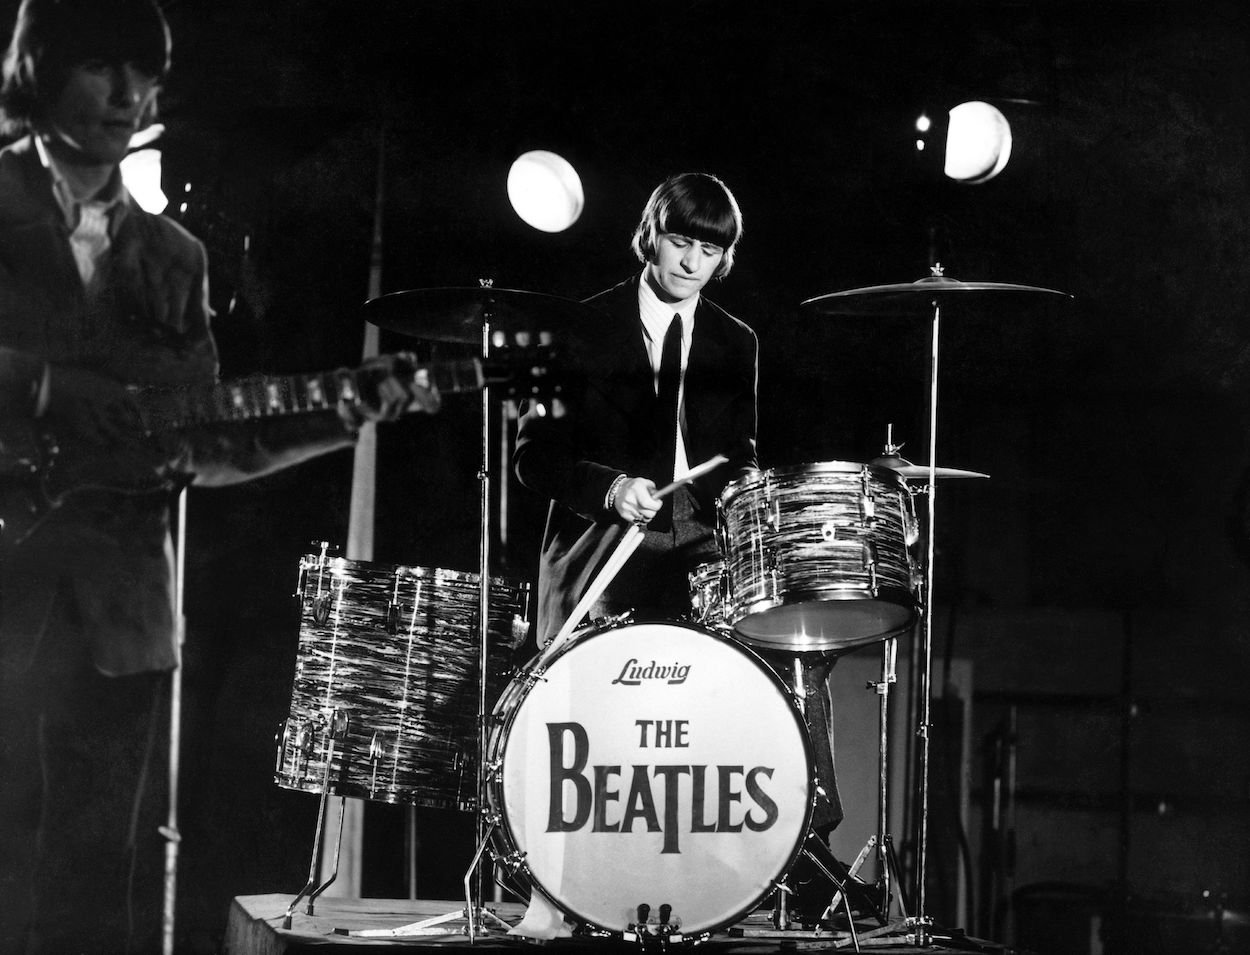 Beatles drummer Ringo Starr plays drums while filming videos for "Paperback Writer" and "Rain," which he once called one of the Beatles weird tracks.